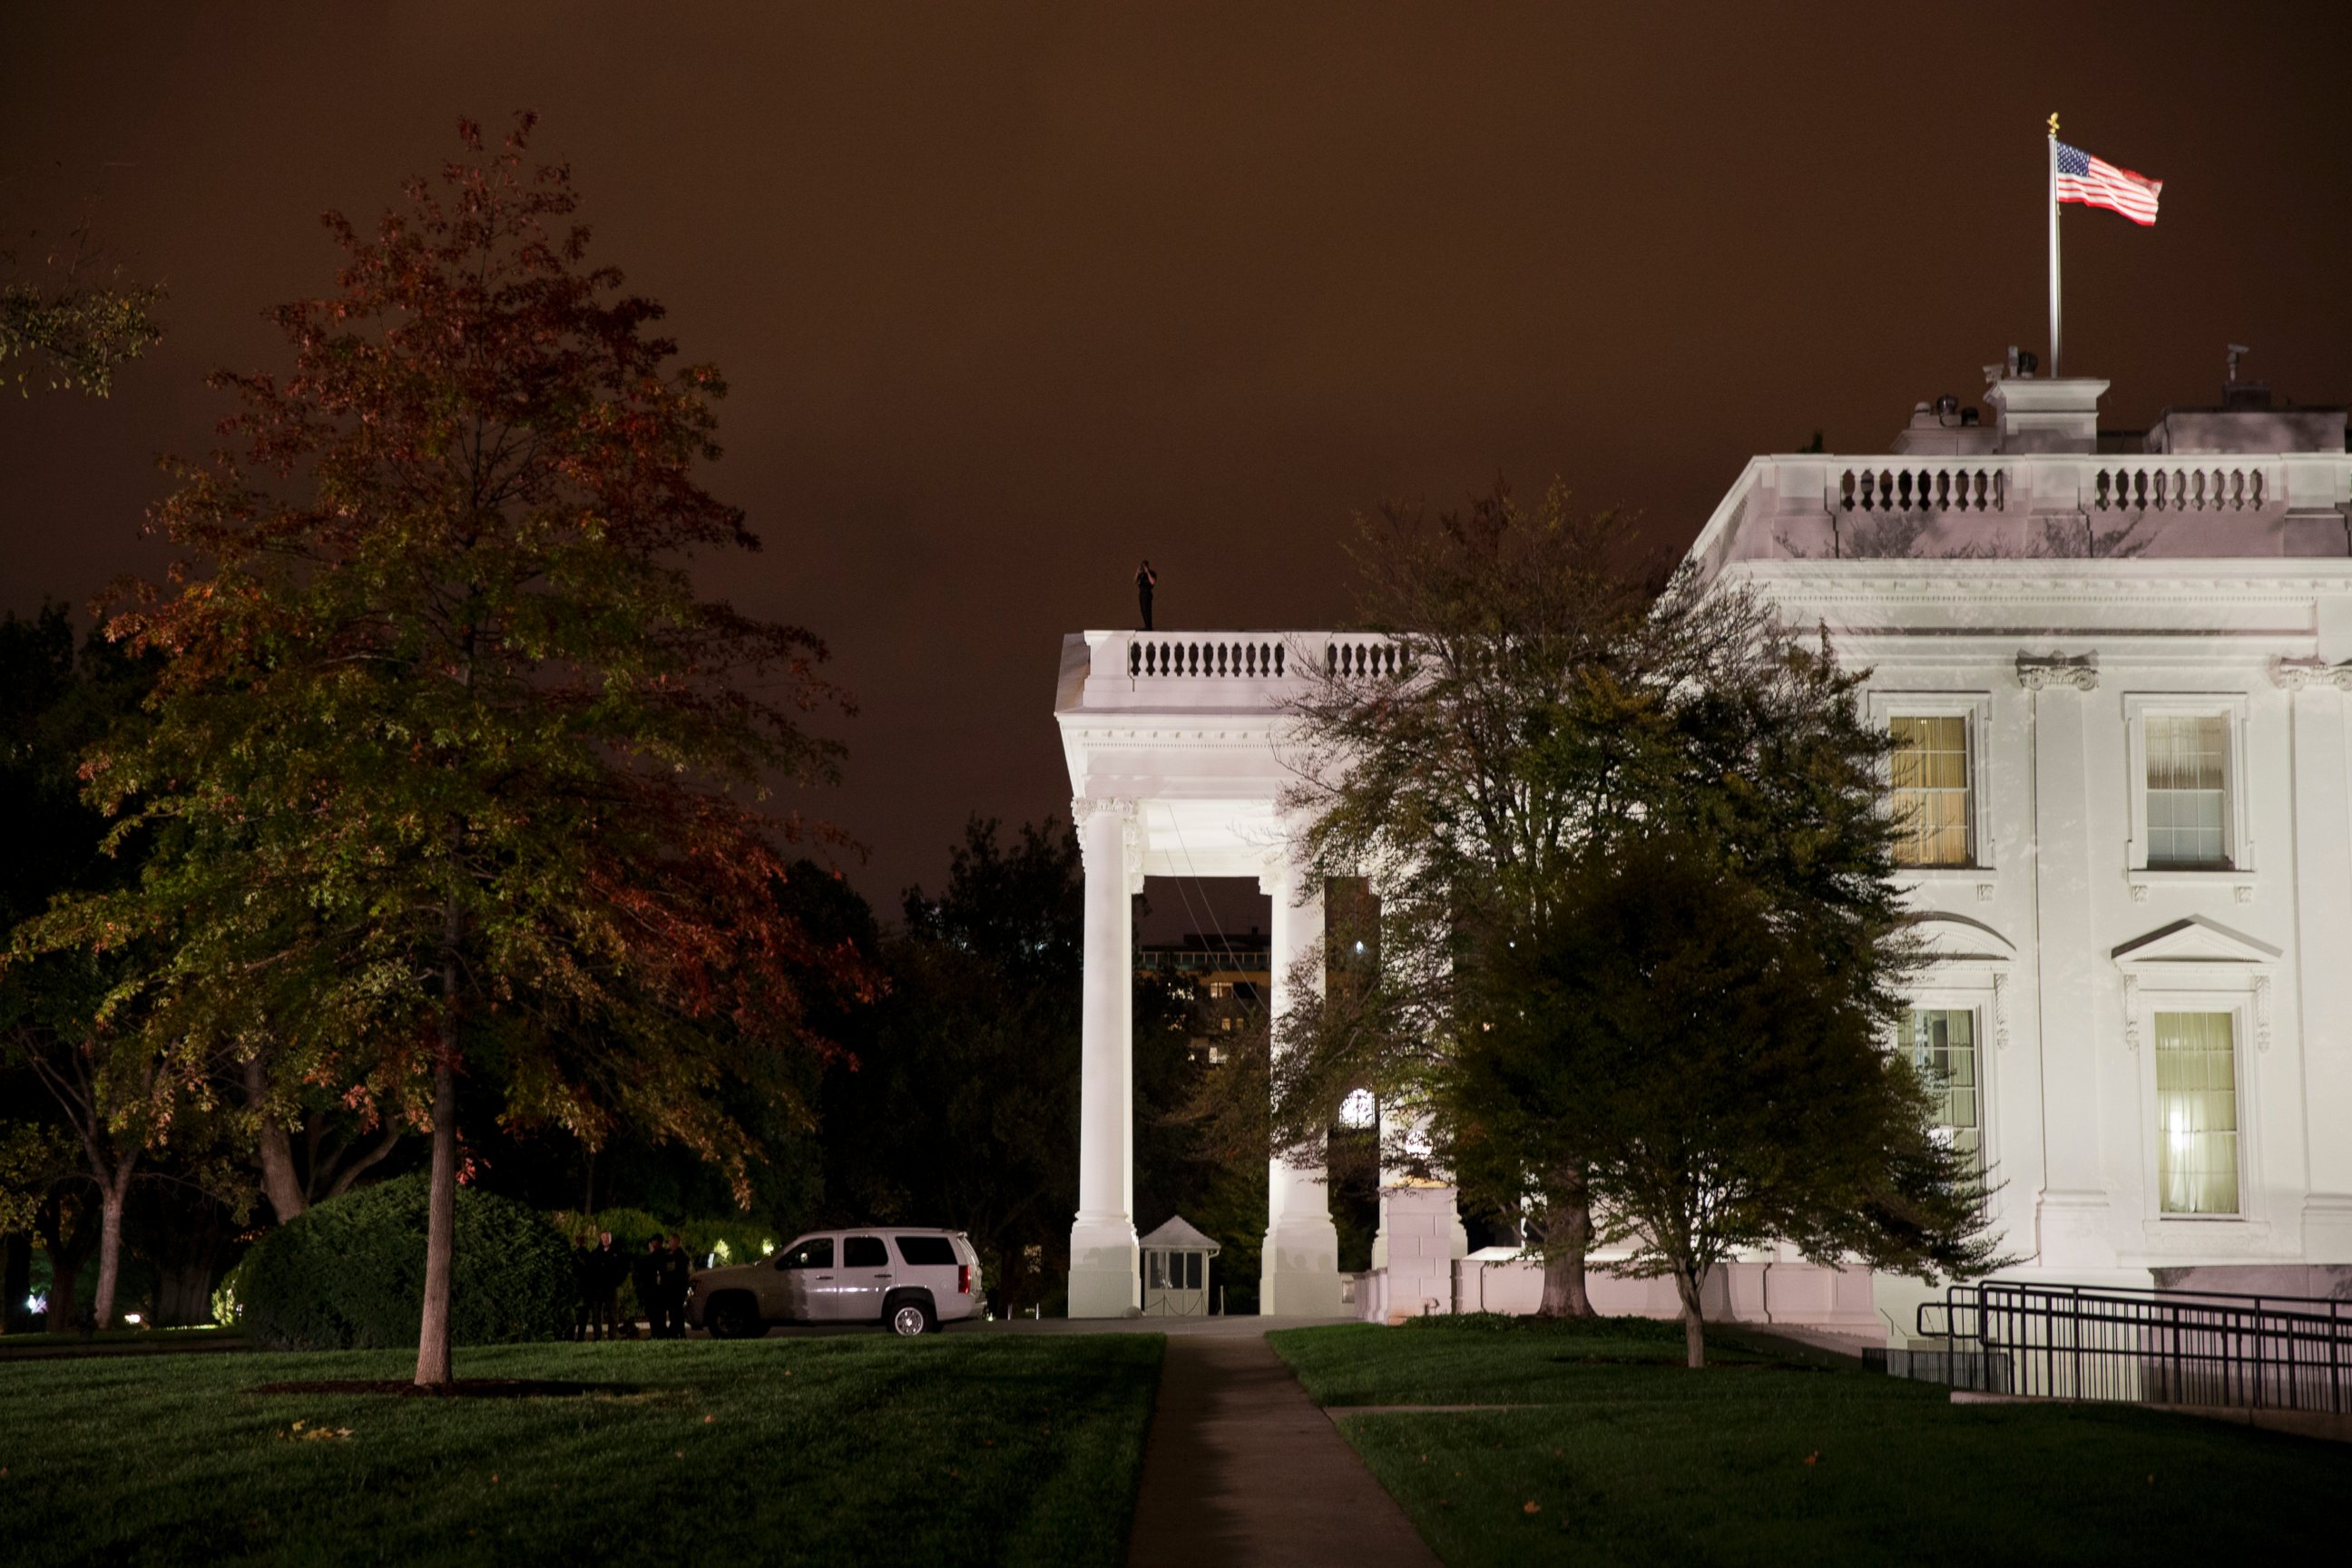 PHOTO: A group of Secret Service police gather on the North Lawn as a member of the Secret Service Counter Assault team surveys from the White House rooftop, Oct. 22, 2014, in Washington.